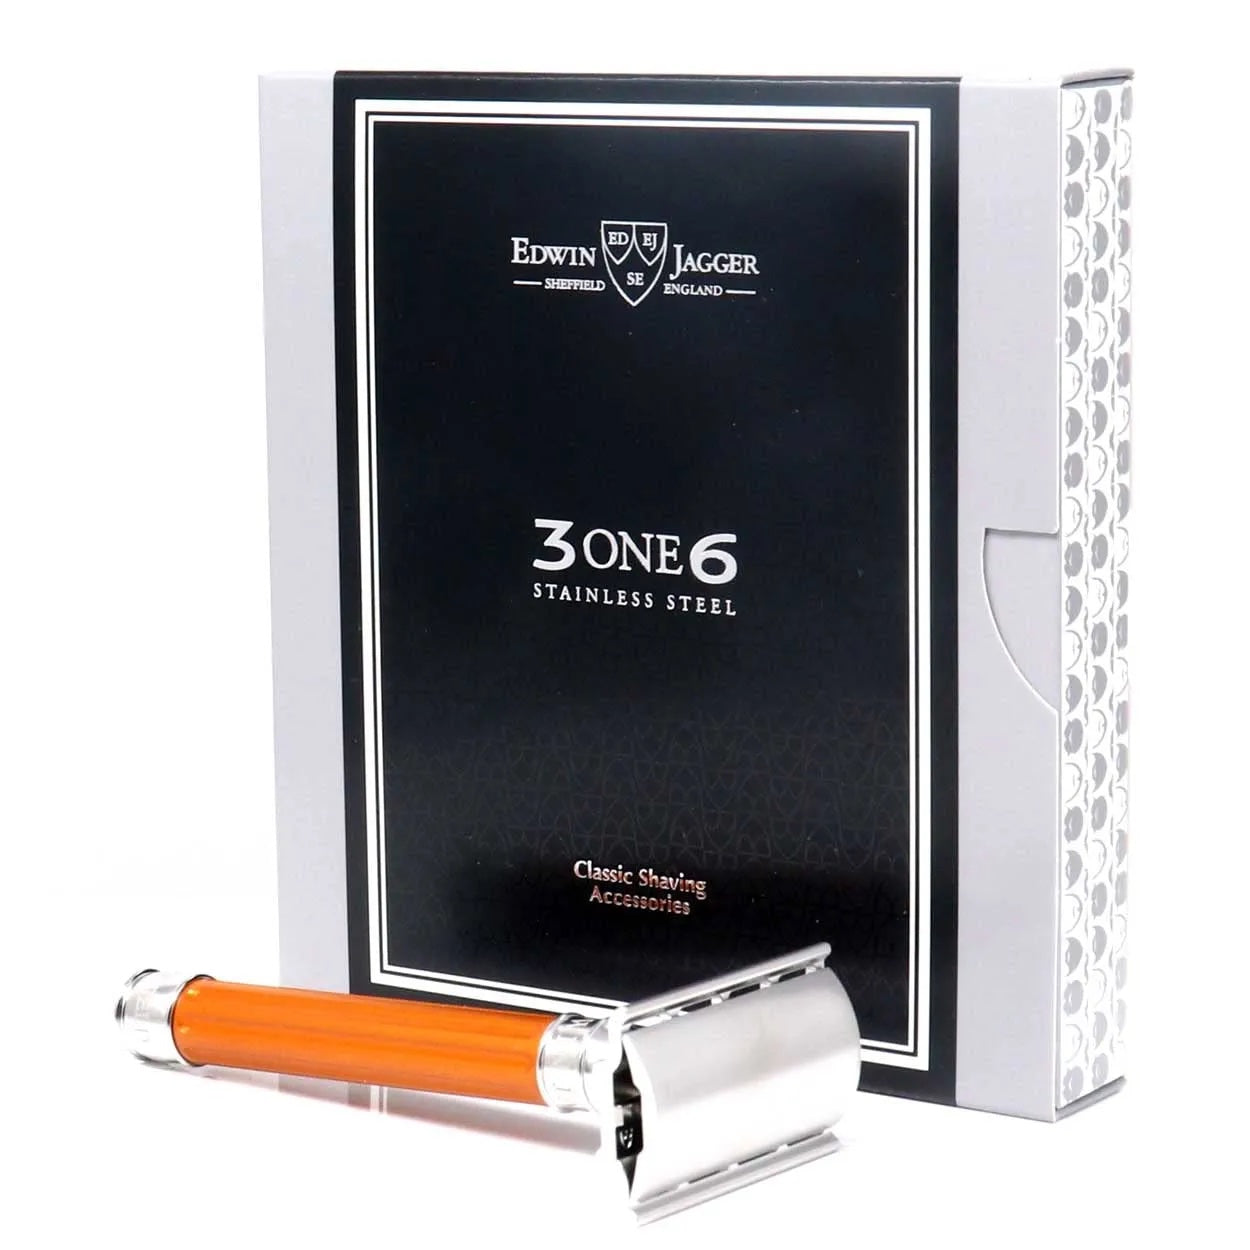 Edwin Jagger 3ONE6 DE Stainless Steel Safety Razor, Grooved, Anodised Orange, 1x Pack of Feather Raz